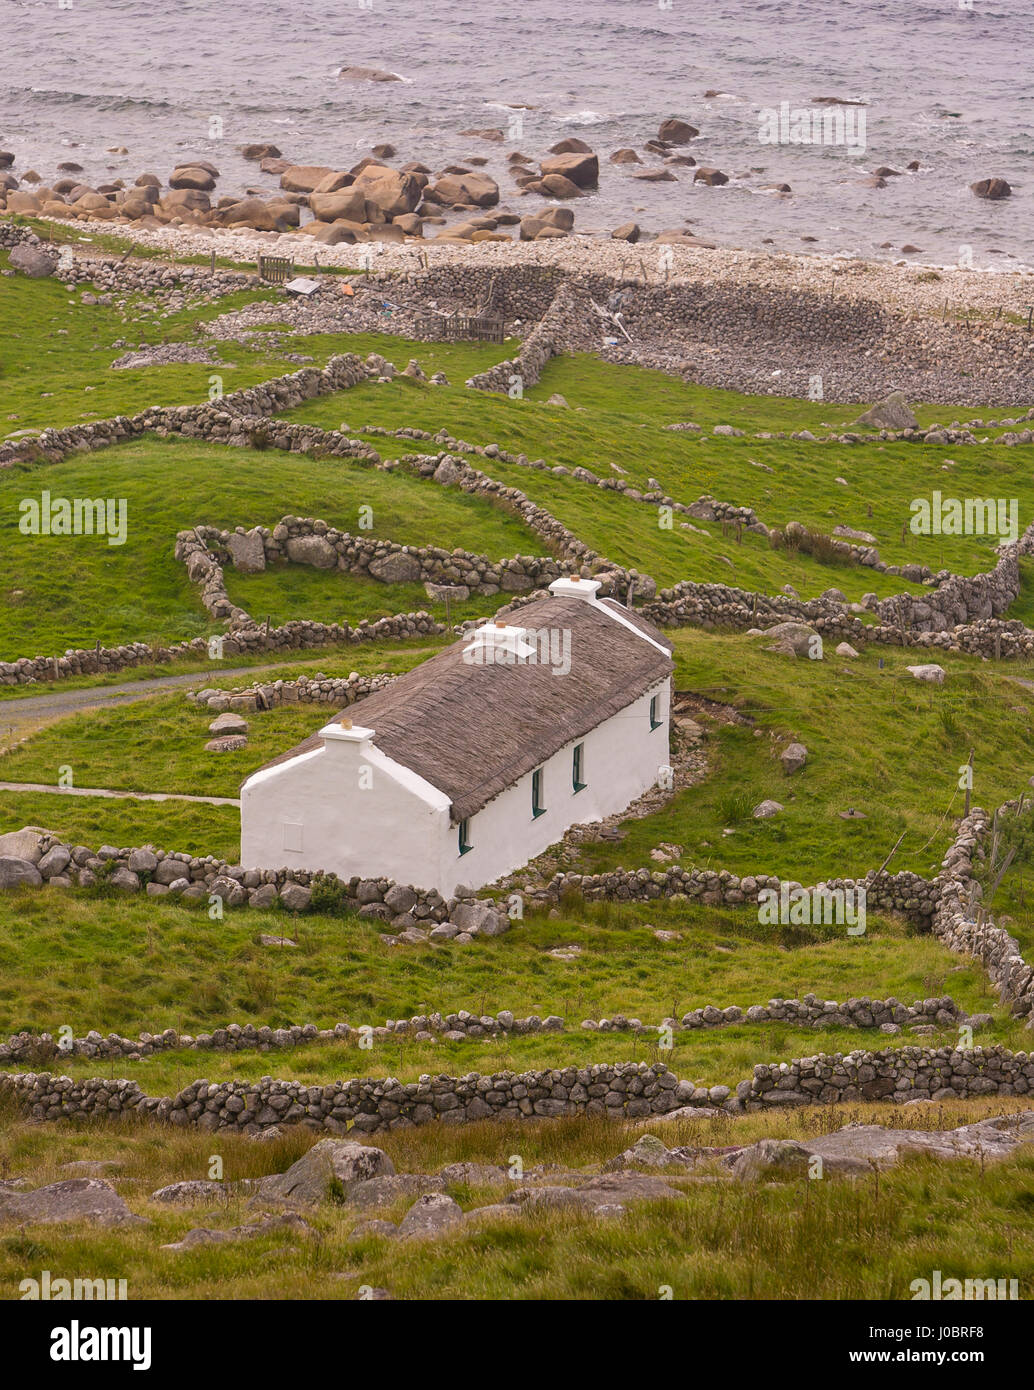 FORELAND HEIGHTS, DONEGAL, IRELAND - Cottage and stone walls on coast. Stock Photo